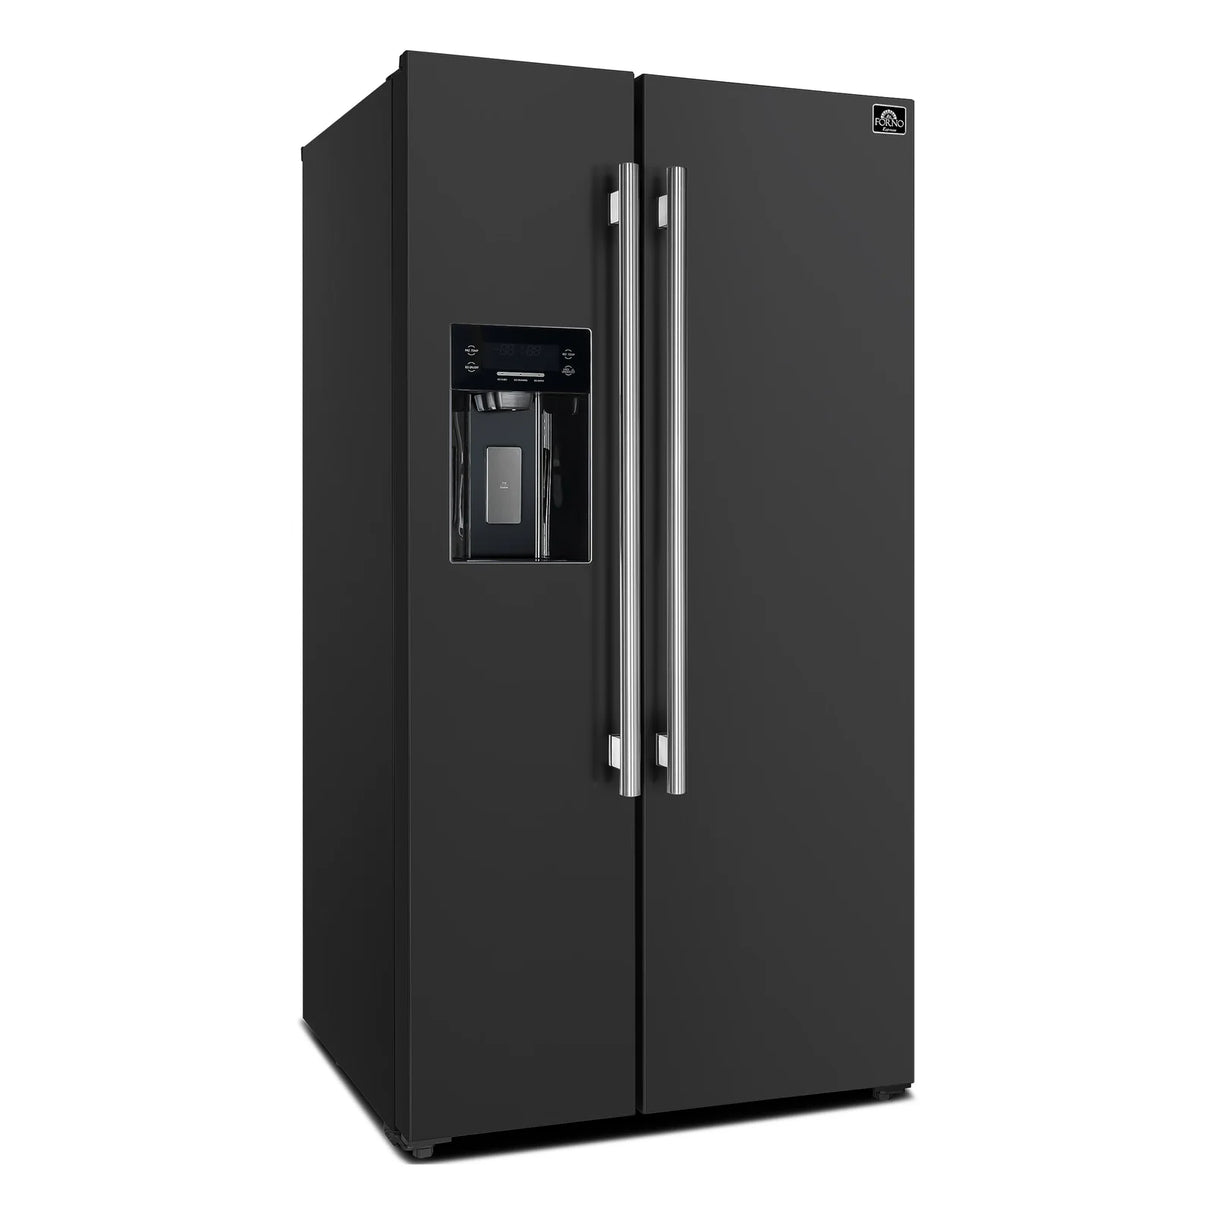 Forno Salerno 36" Side by Side Refrigerator with Ice Maker Black